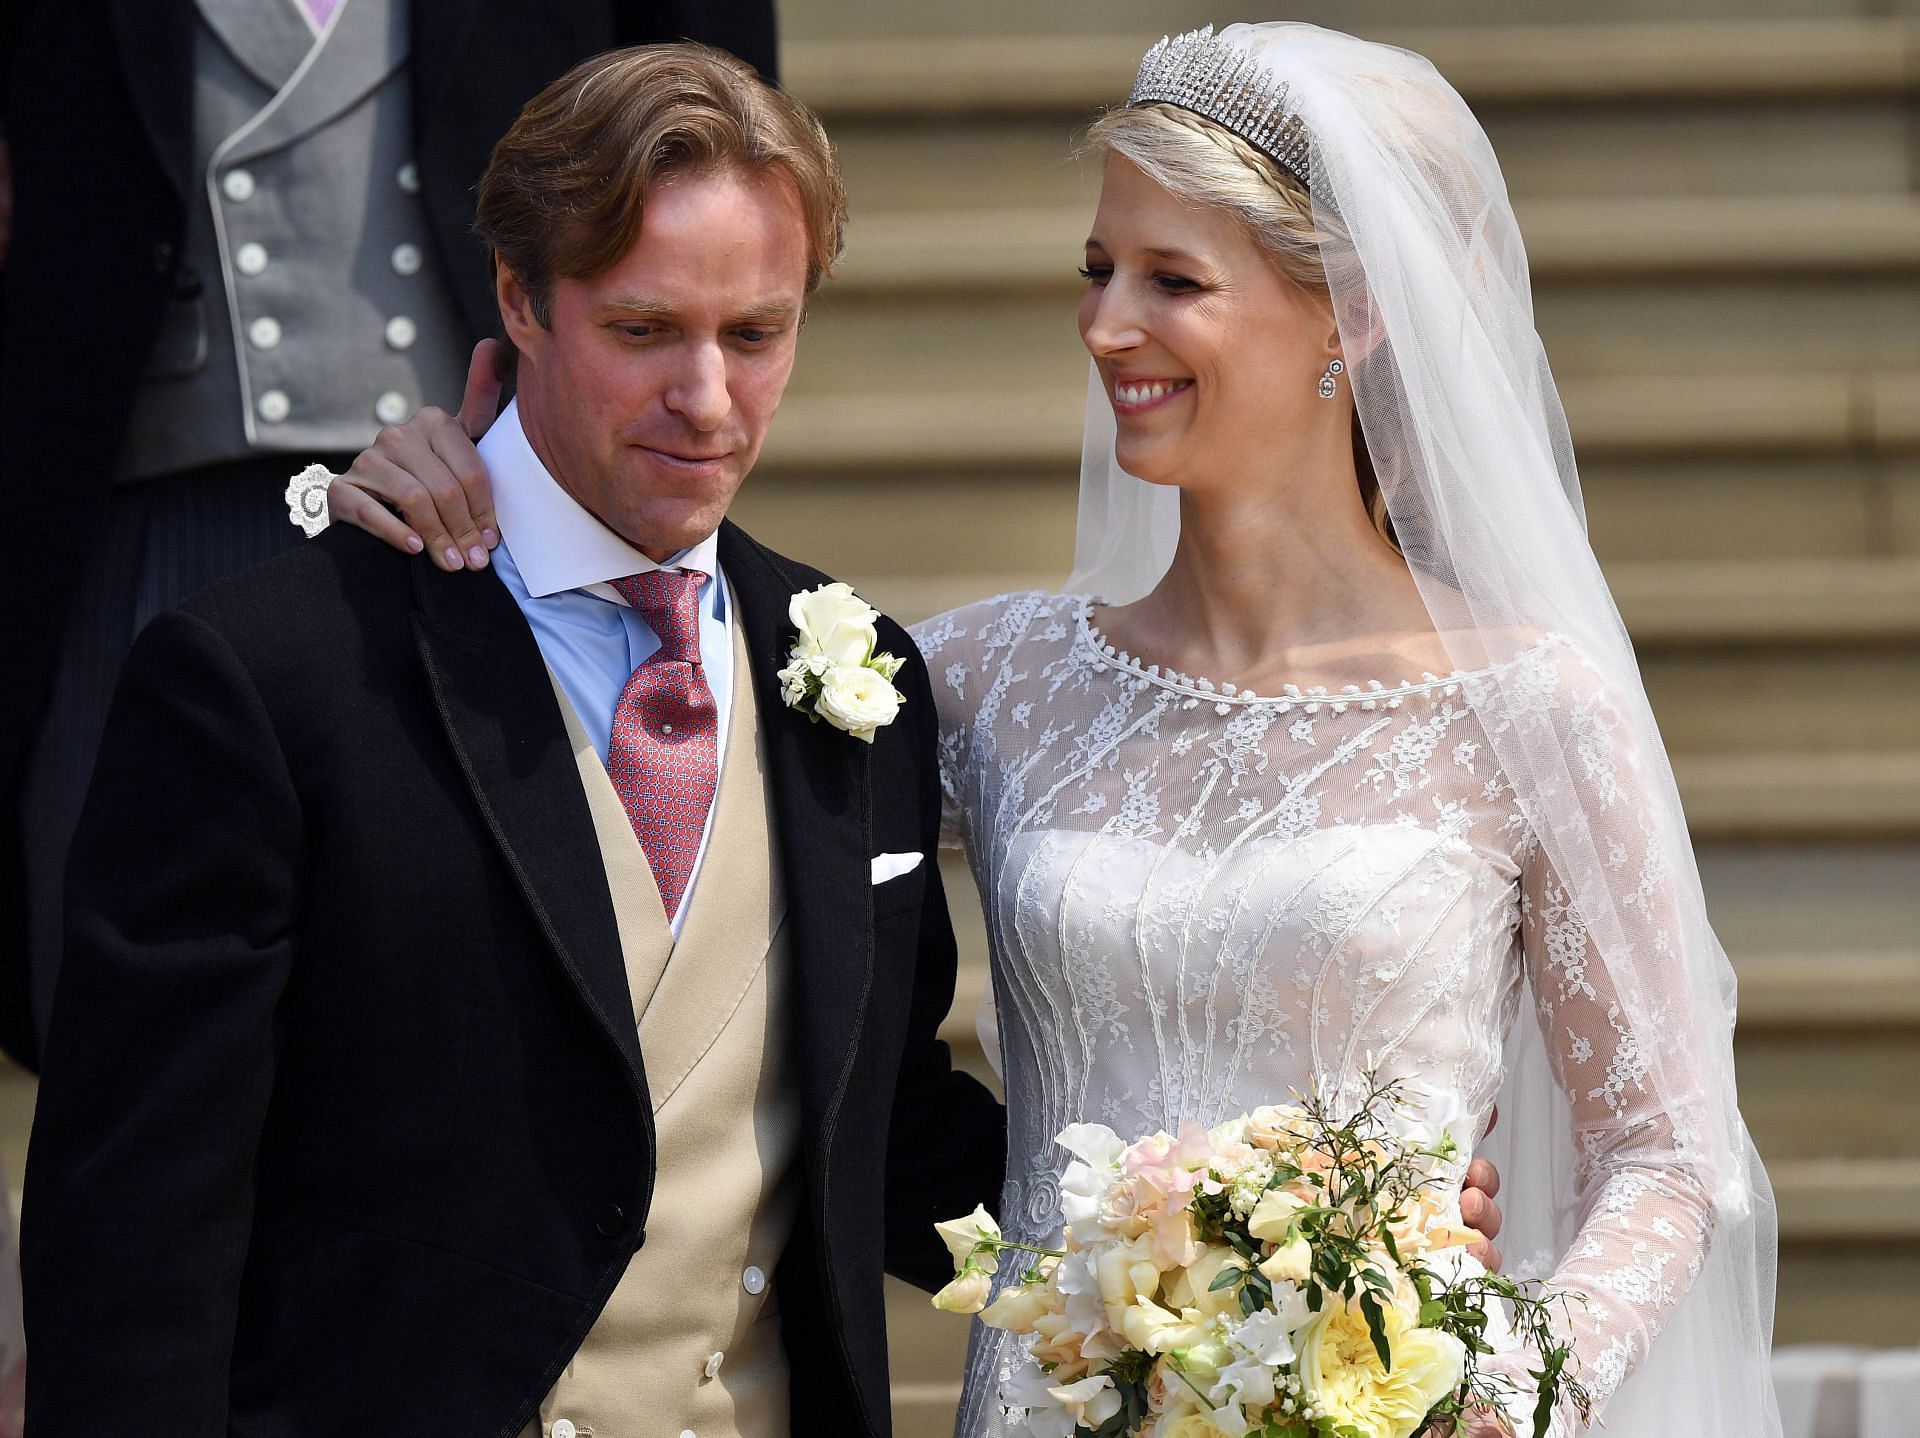 The Wedding Of Lady Gabriella Windsor And Mr Thomas Kingston, 2019 (Image via. Getty/Andrew Parsons)